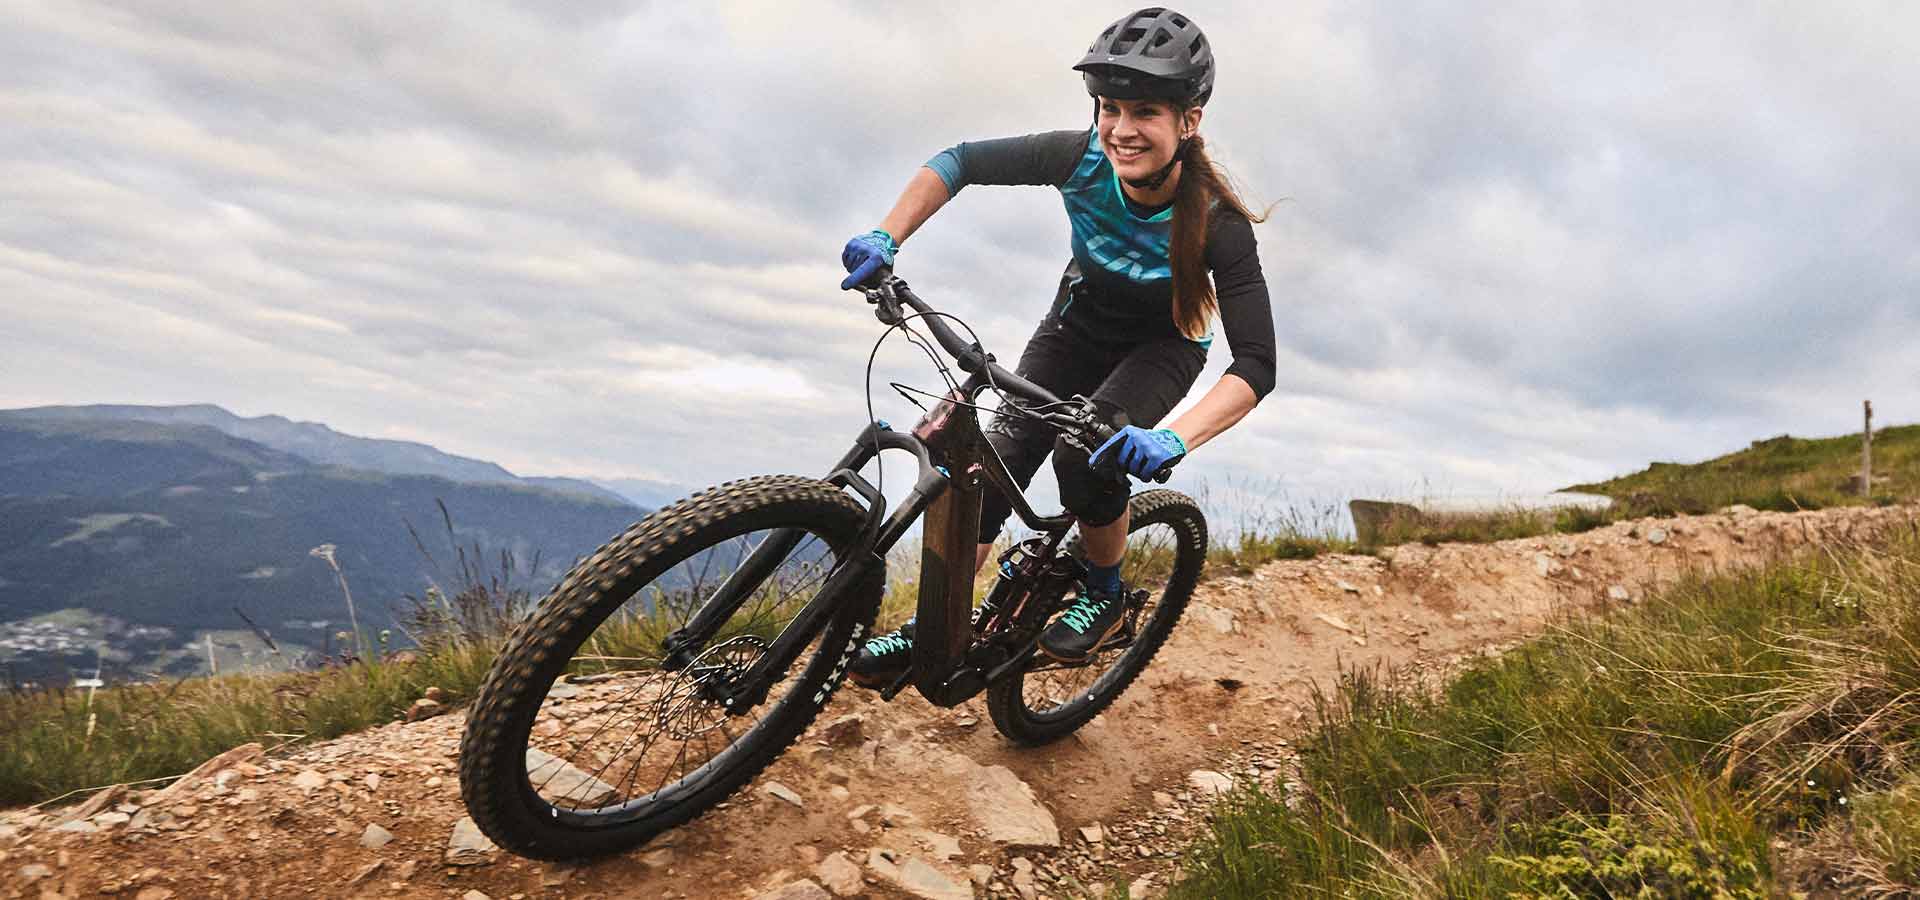 Purchase advise on the perfect e-bike.
A woman riding an e-bike on the mountain top.